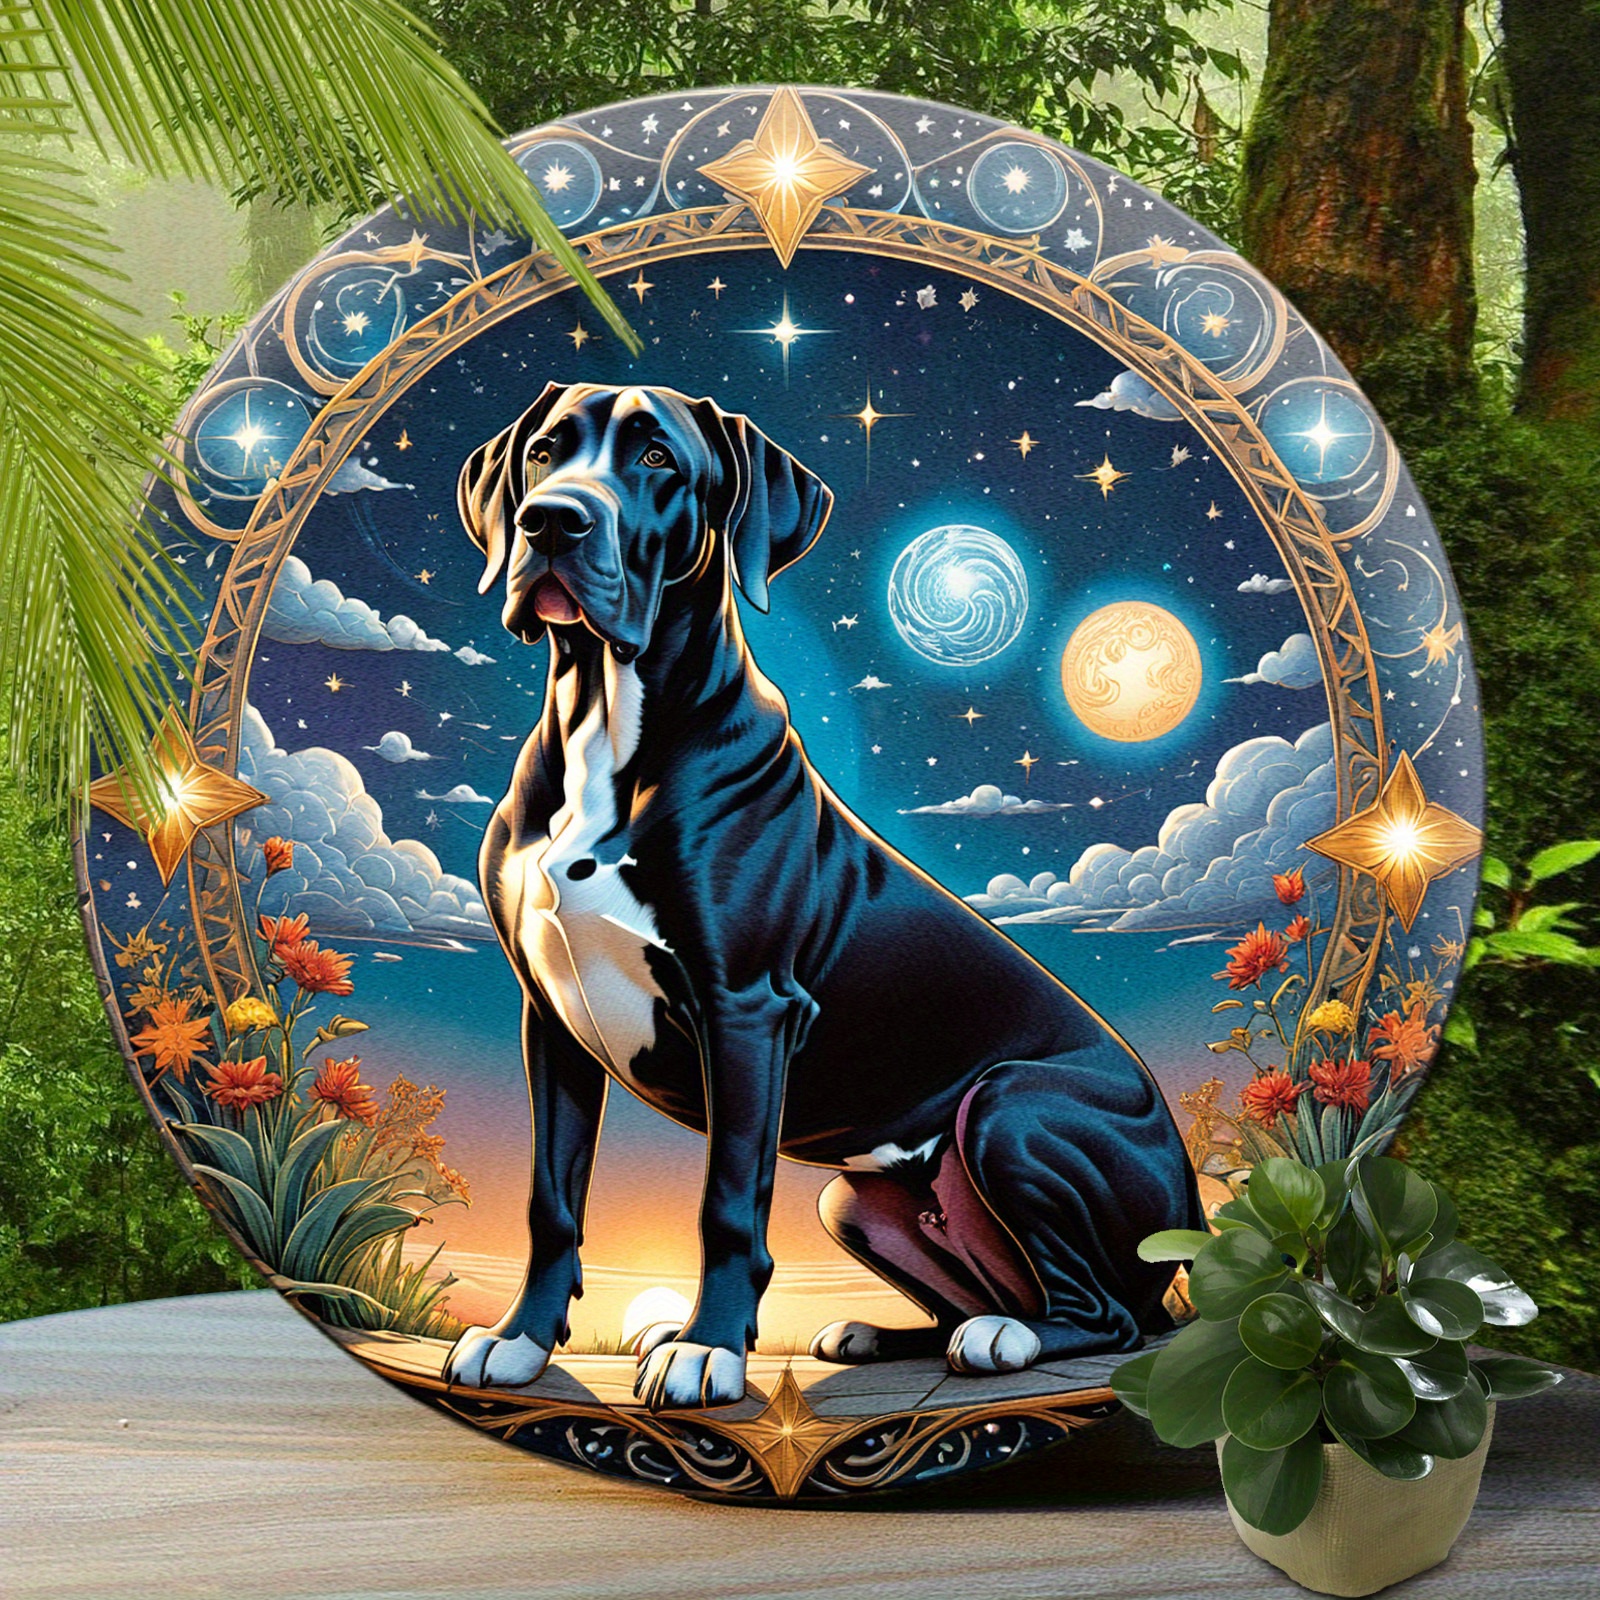 

1pc, Great Dane Sign - Cute Dog Aluminum Sign, Suitable For Home Room Cafe Bedroom Bar Living Room Garage Wall Decoration, Round Fashion Art Aesthetic, Holiday Gift 8x8 Inch (20x20cm)